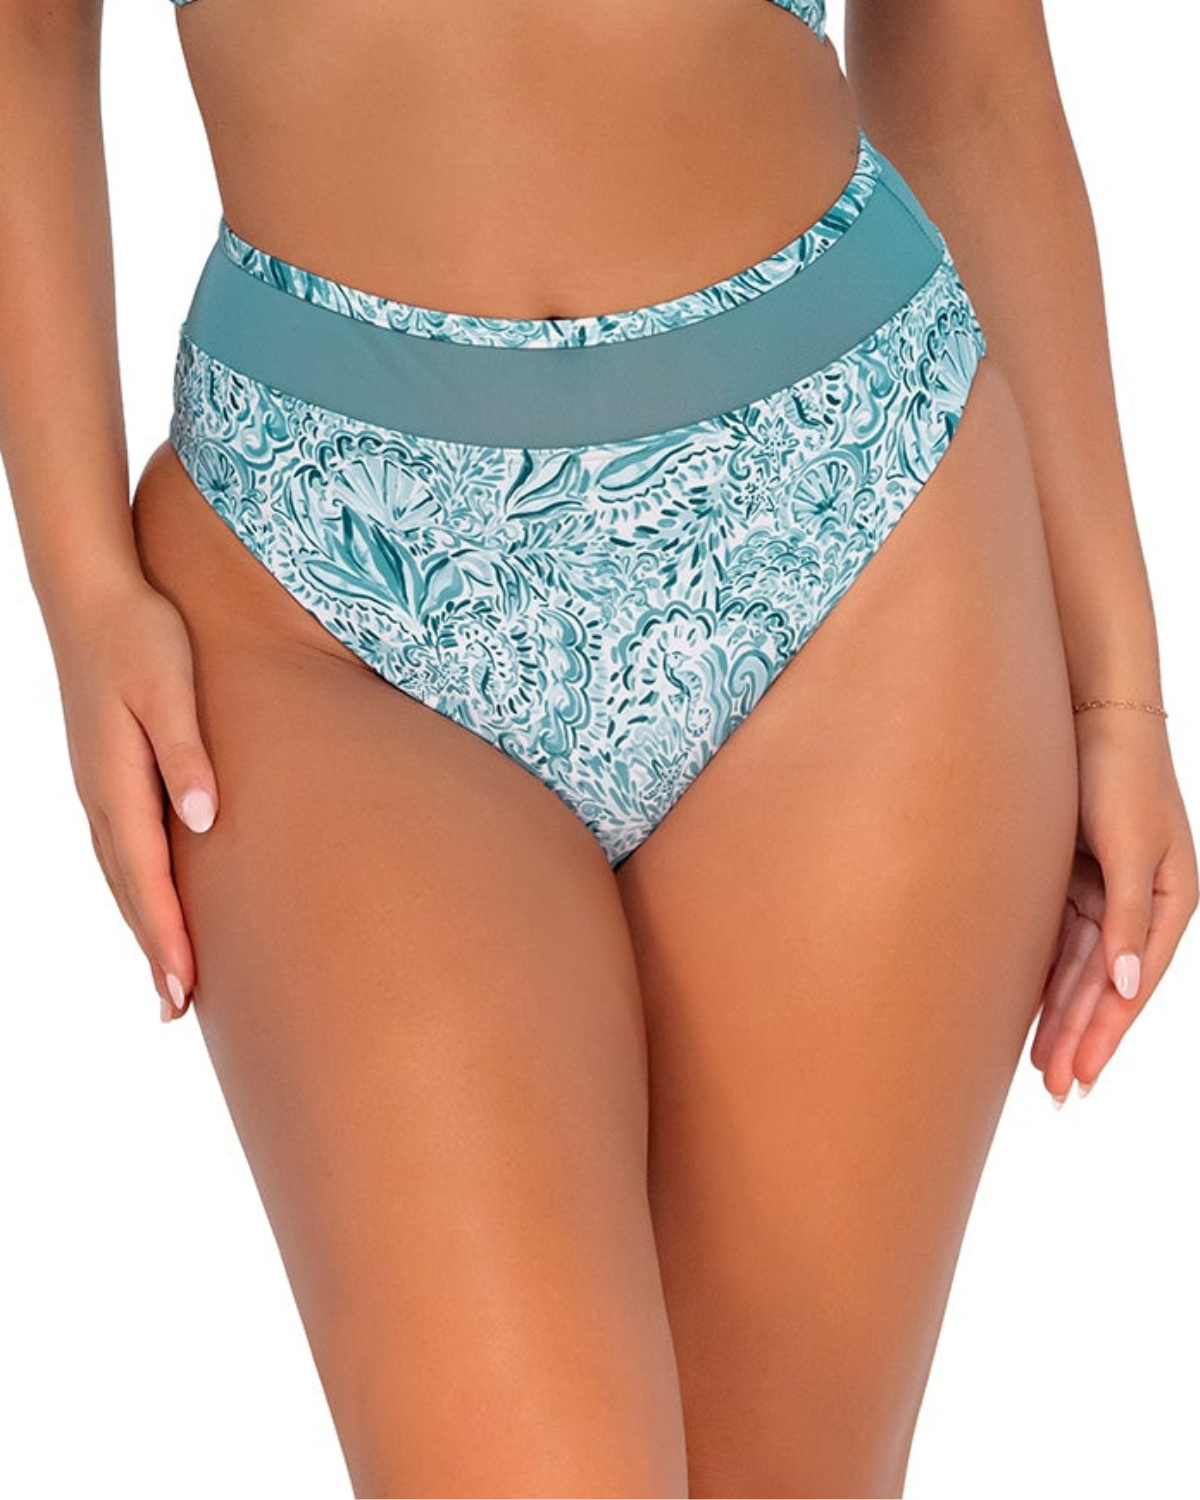 Model wearing a high waist high leg brief bottom in a pale turquoise, white and navy paisley print.